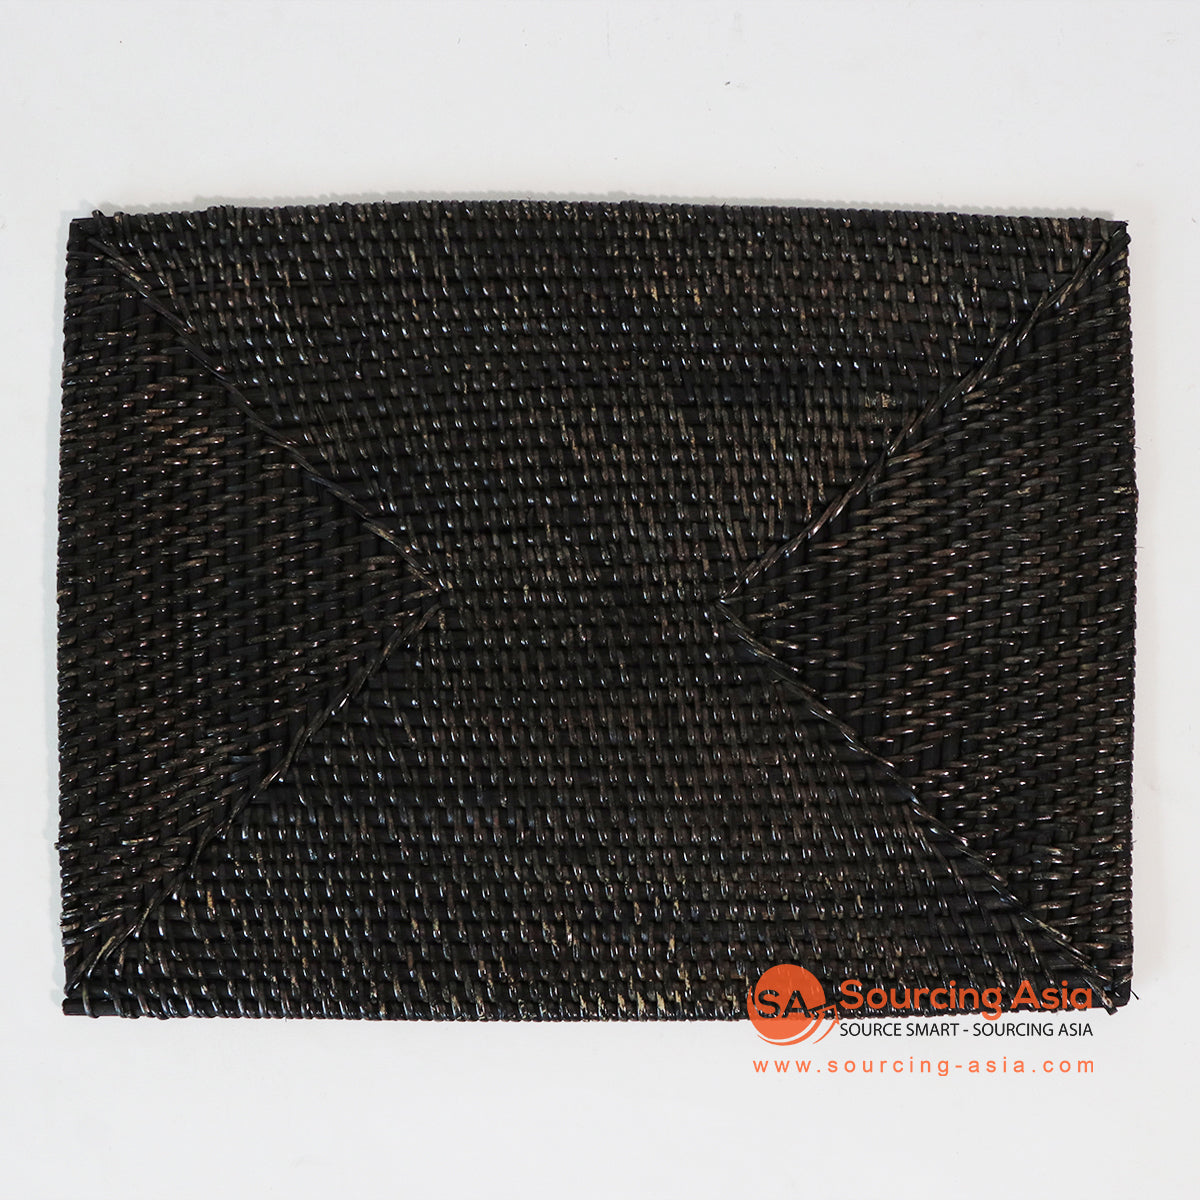 MTIC053 BLACK WOVEN RATTAN PLACEMAT